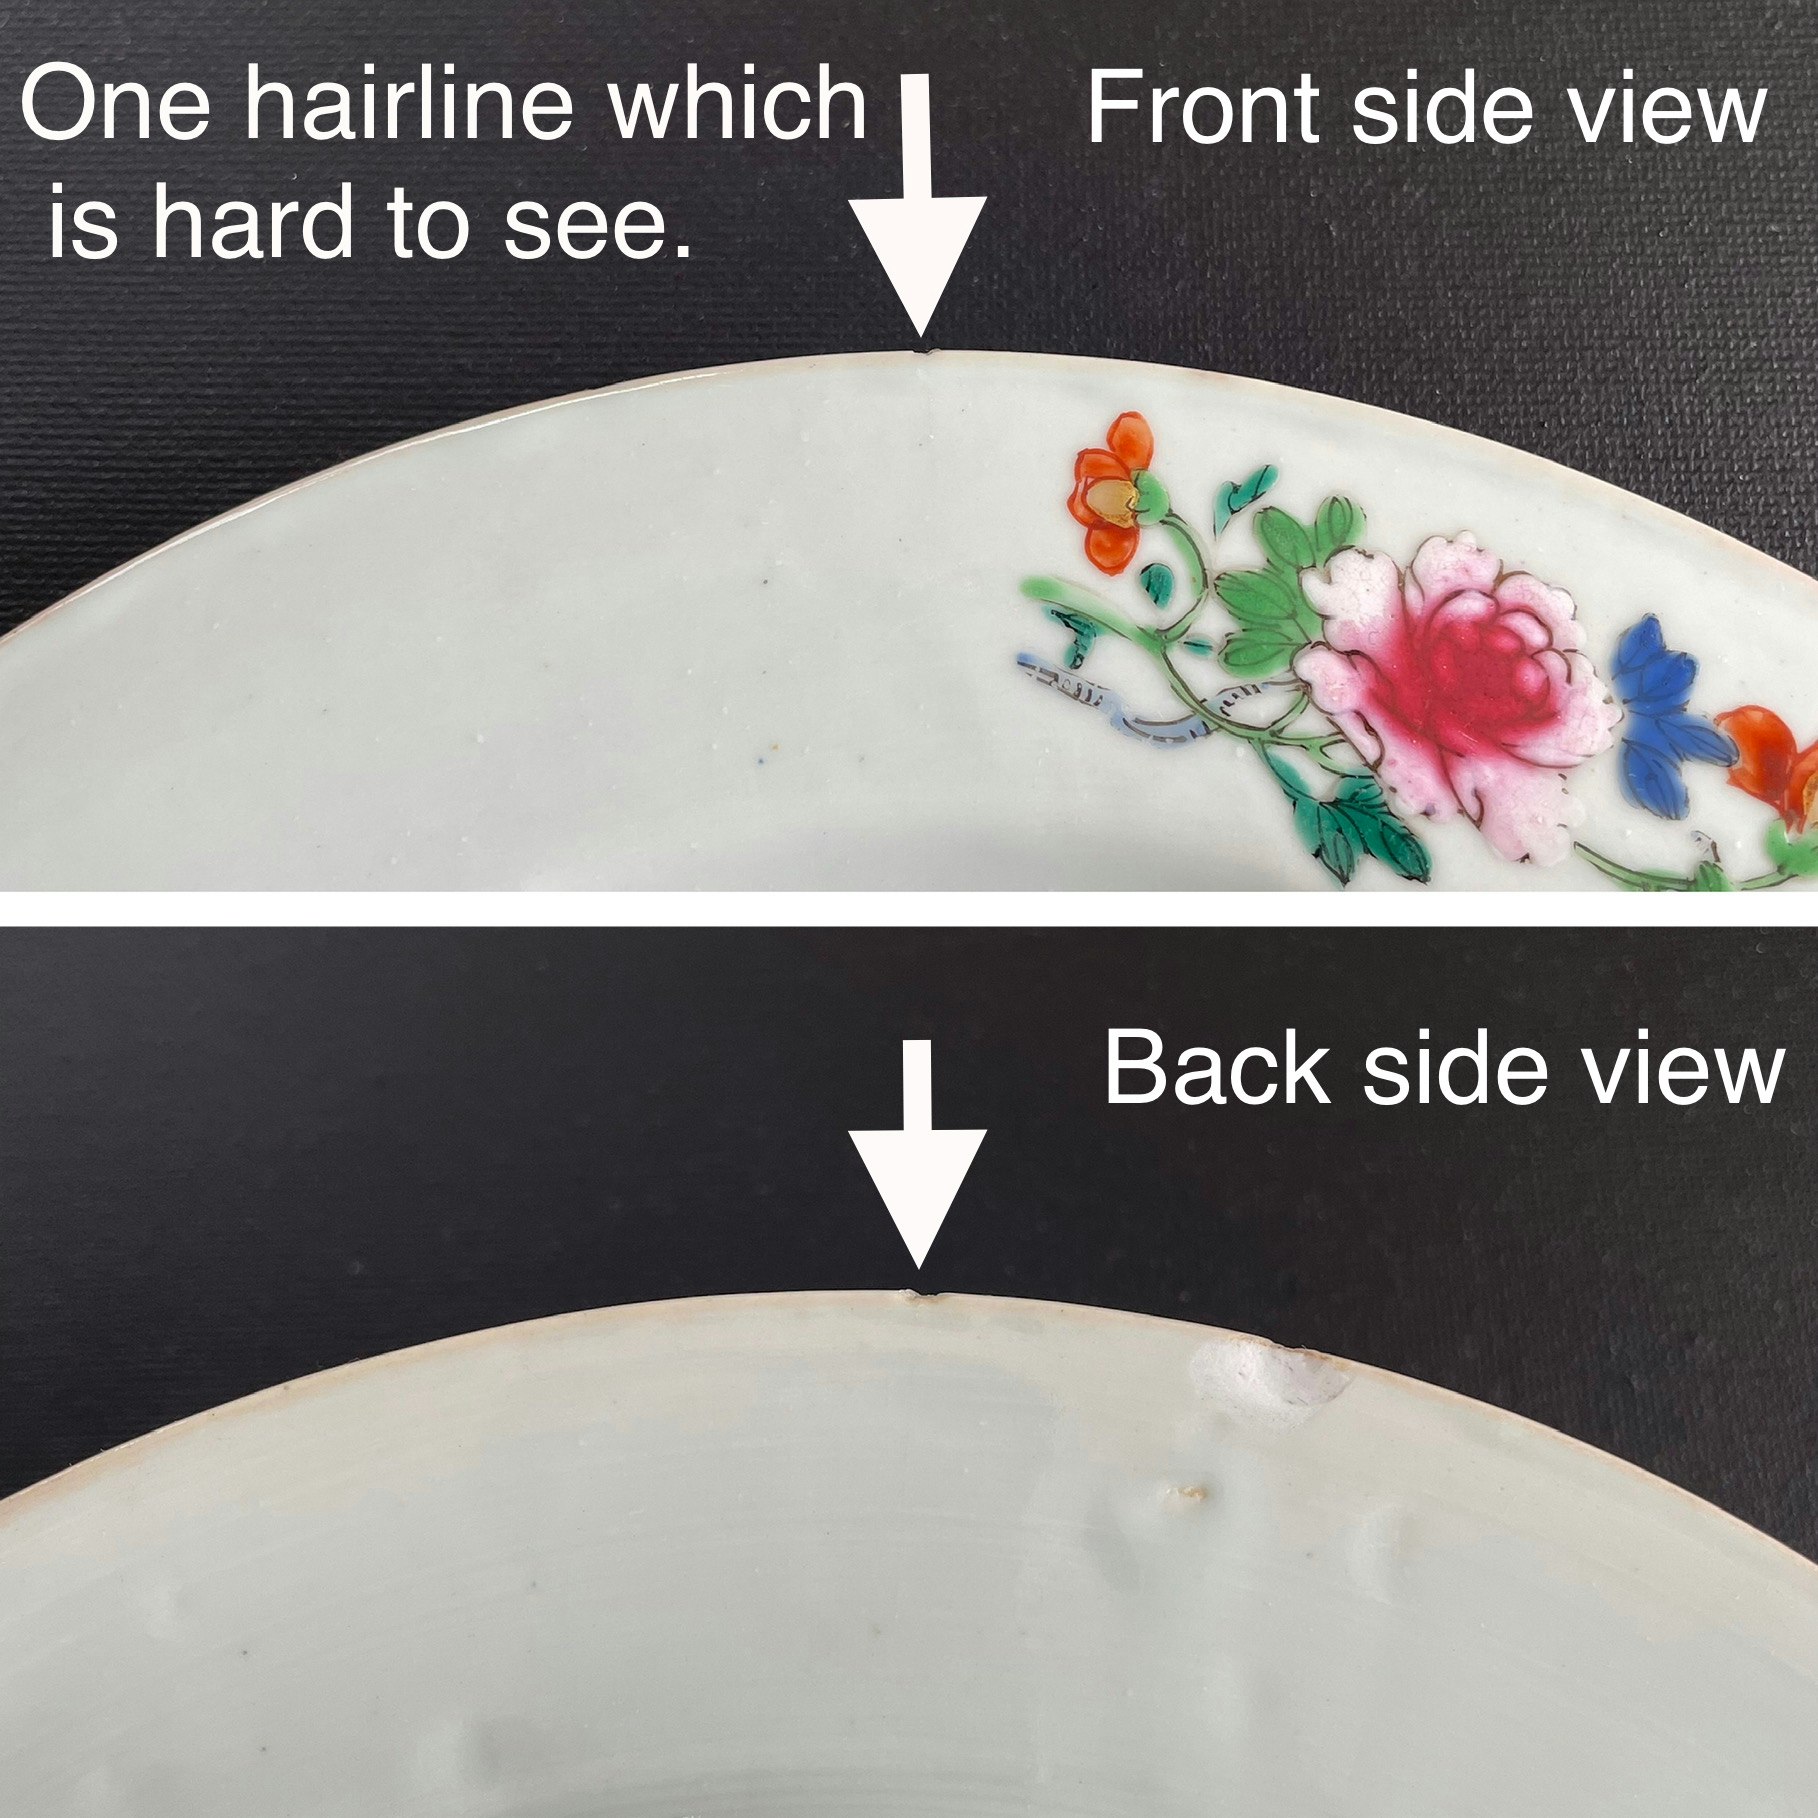 Chinese Antique porcelain plate first half of 18th C , Qianlong #1605